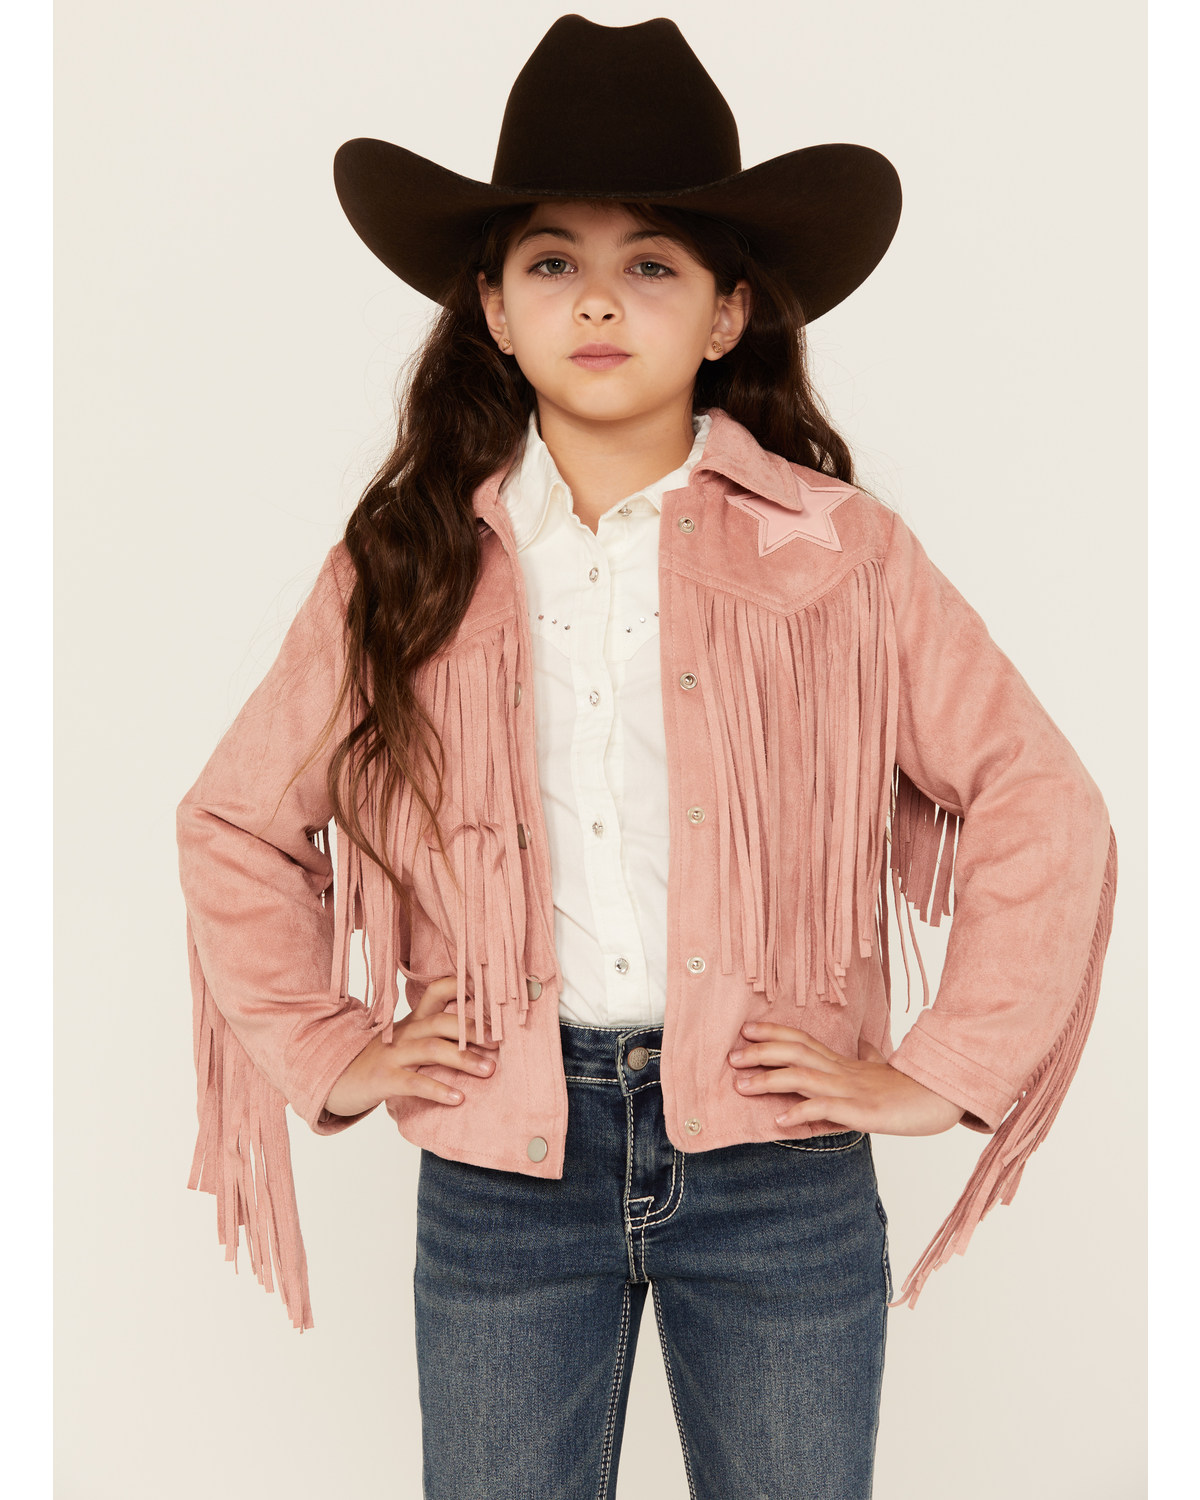 Fornia Girls' Star Patch Fringe Jacket